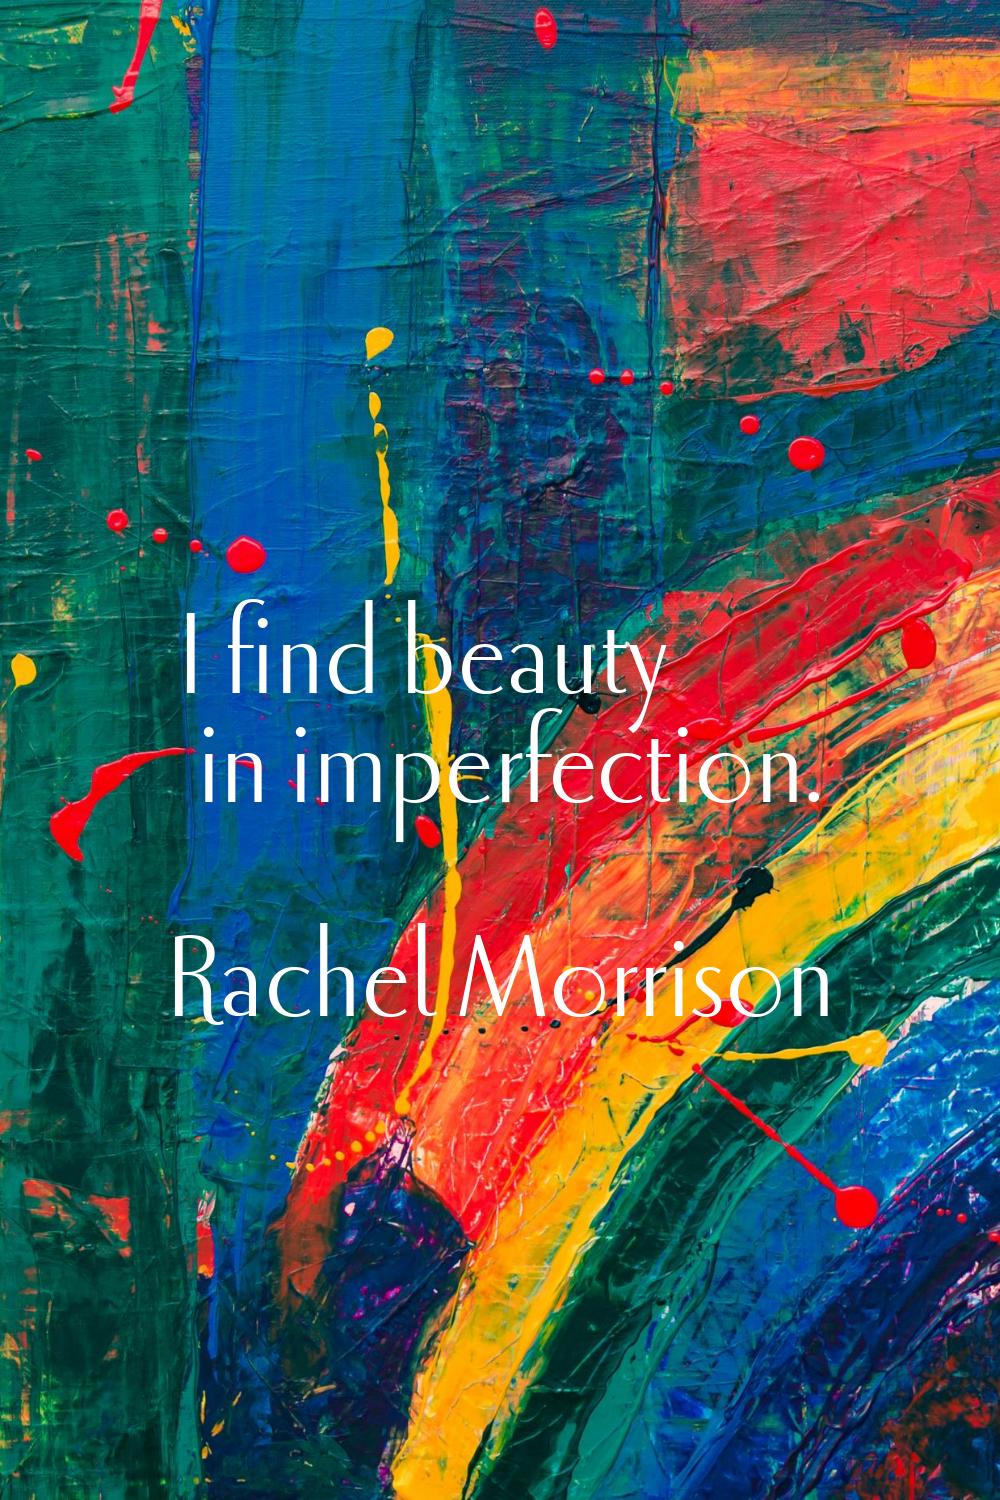 I find beauty in imperfection.